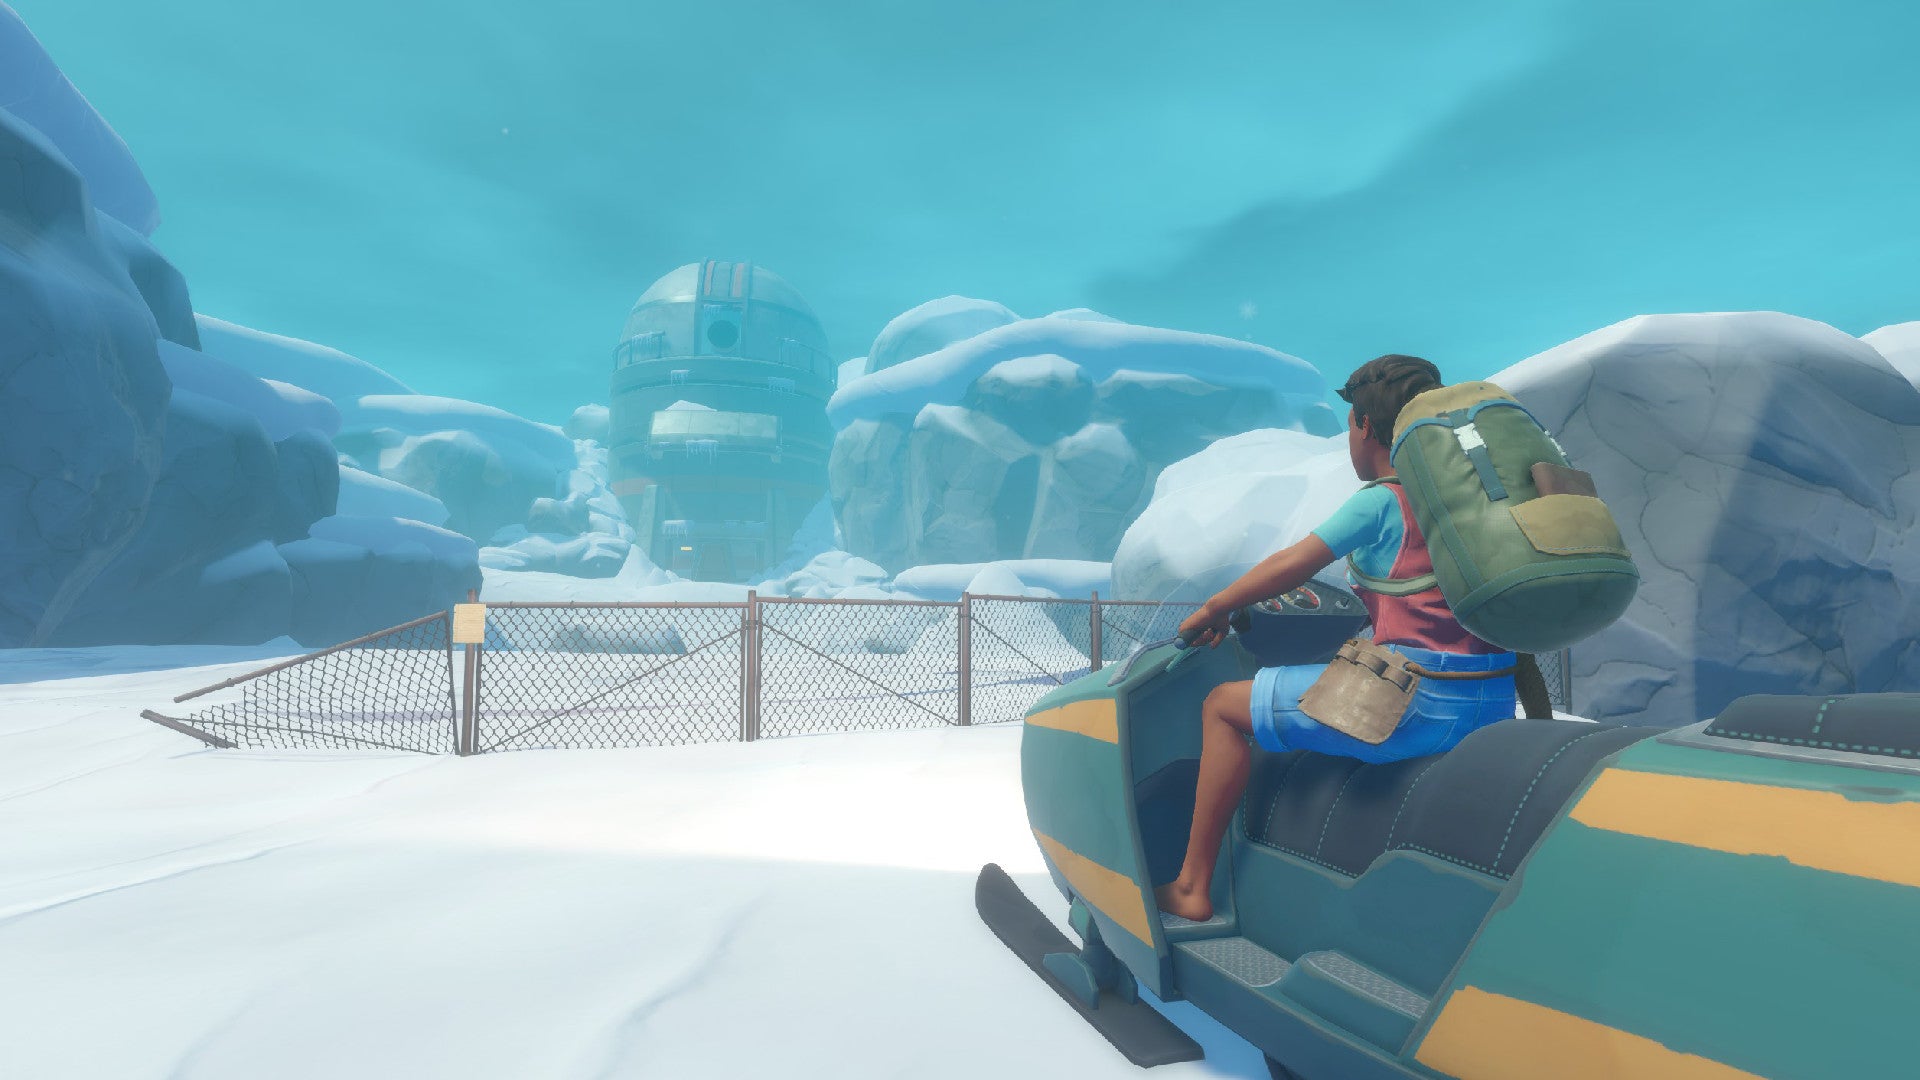 The player rides a snowmobile towards a research station in the Temperance region